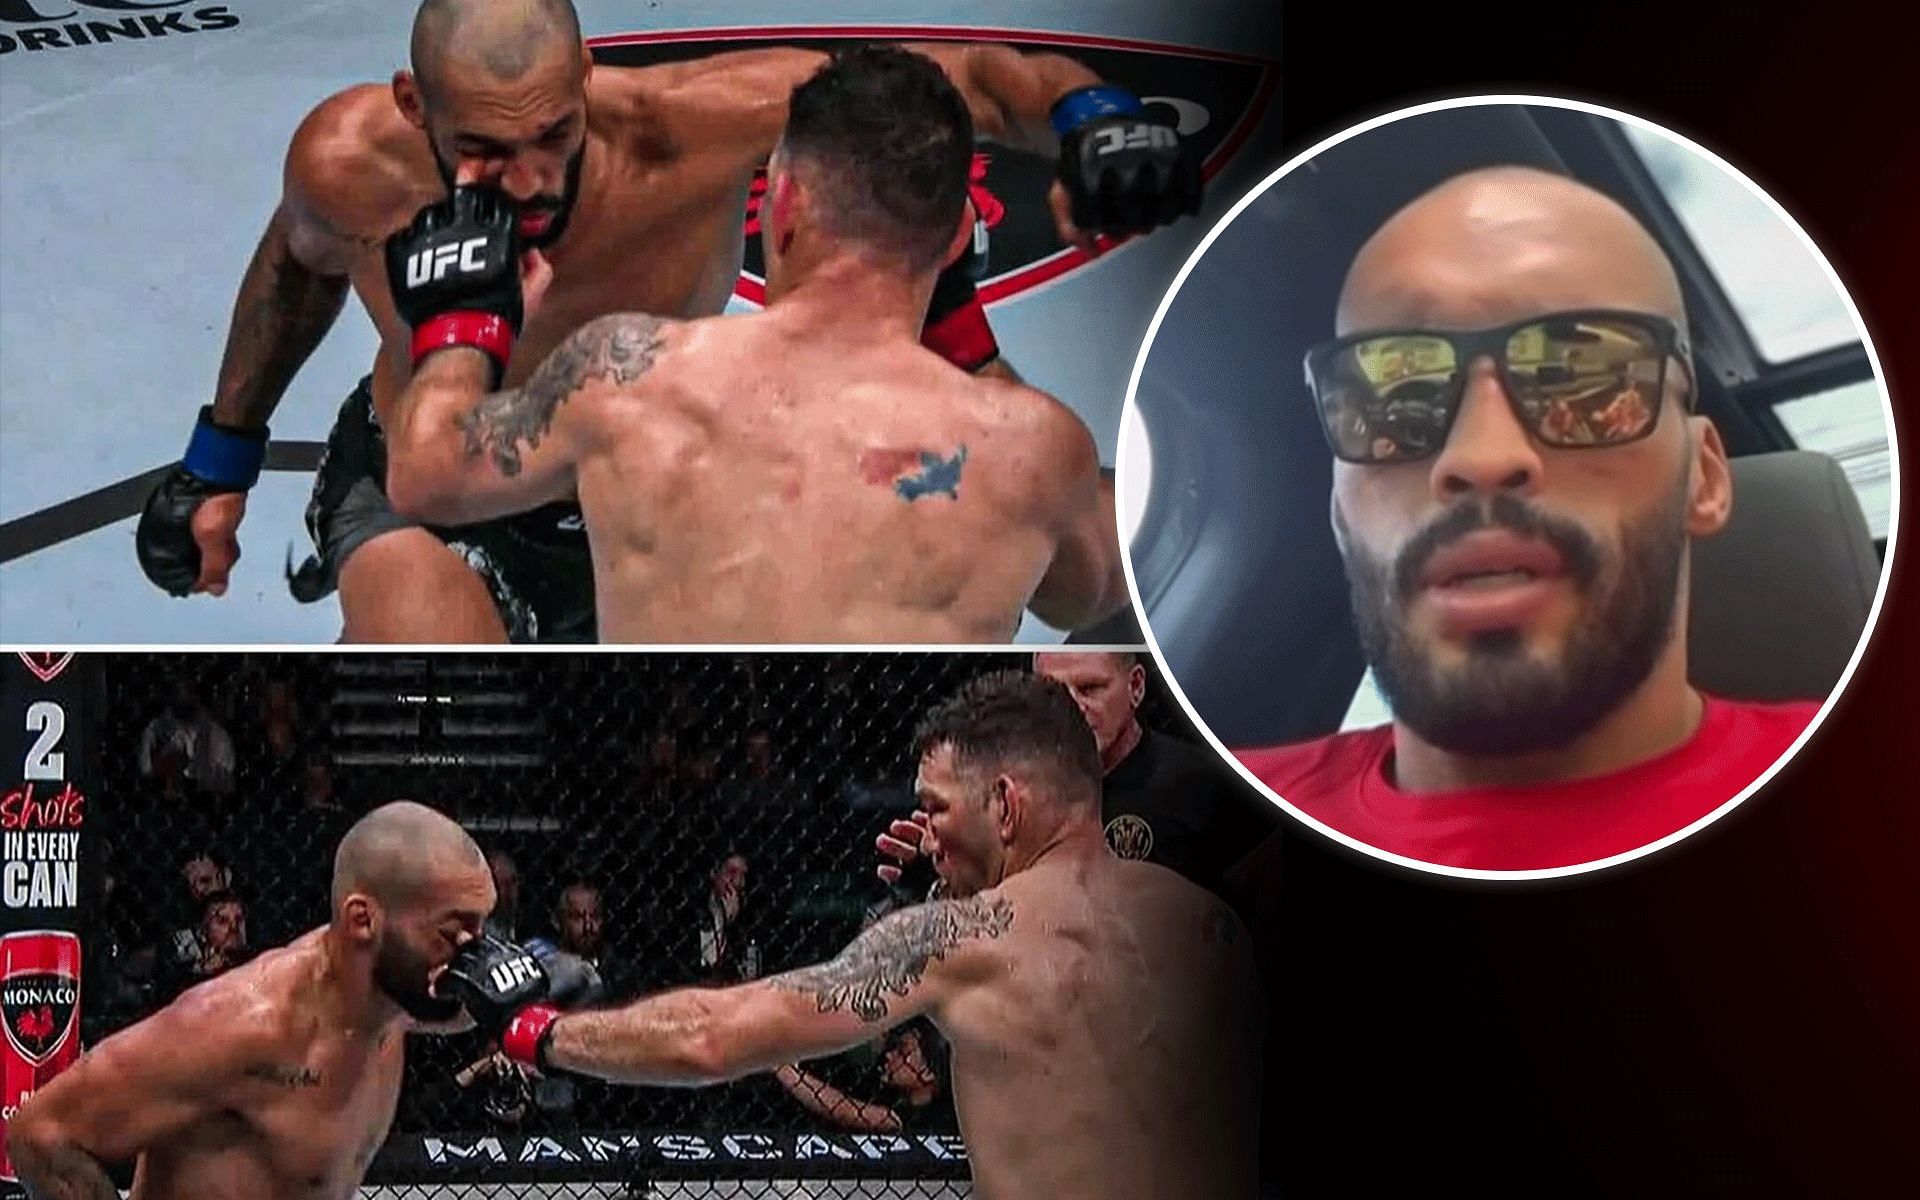 Bruno Silva (top left, bottom left, and far right) was on the receiving end of eye pokes against Chris Weidman (top right and bottom right) [Images courtesy: @brunoblindado]